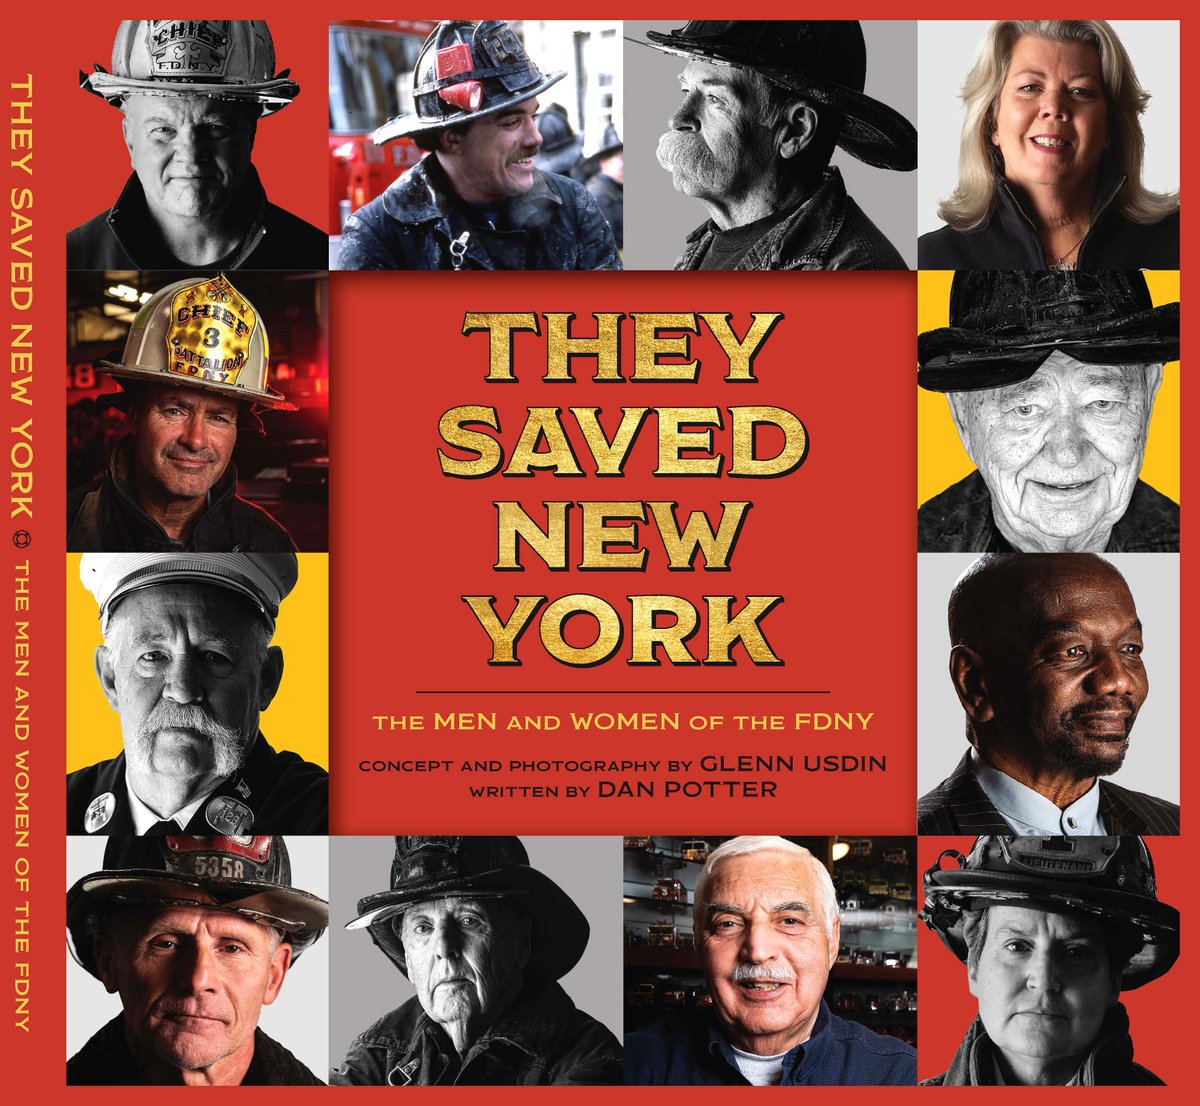 Join NYSAFC for a special roundtable discussion on the powerful book 'They Saved New York' during the 118th Annual Conference & #FIRE2024 Expo in Syracuse. Photographer Glenn Usdin & Author Dan Potter will lead the conversation on 6/13. Learn more: bit.ly/3KaPFhn